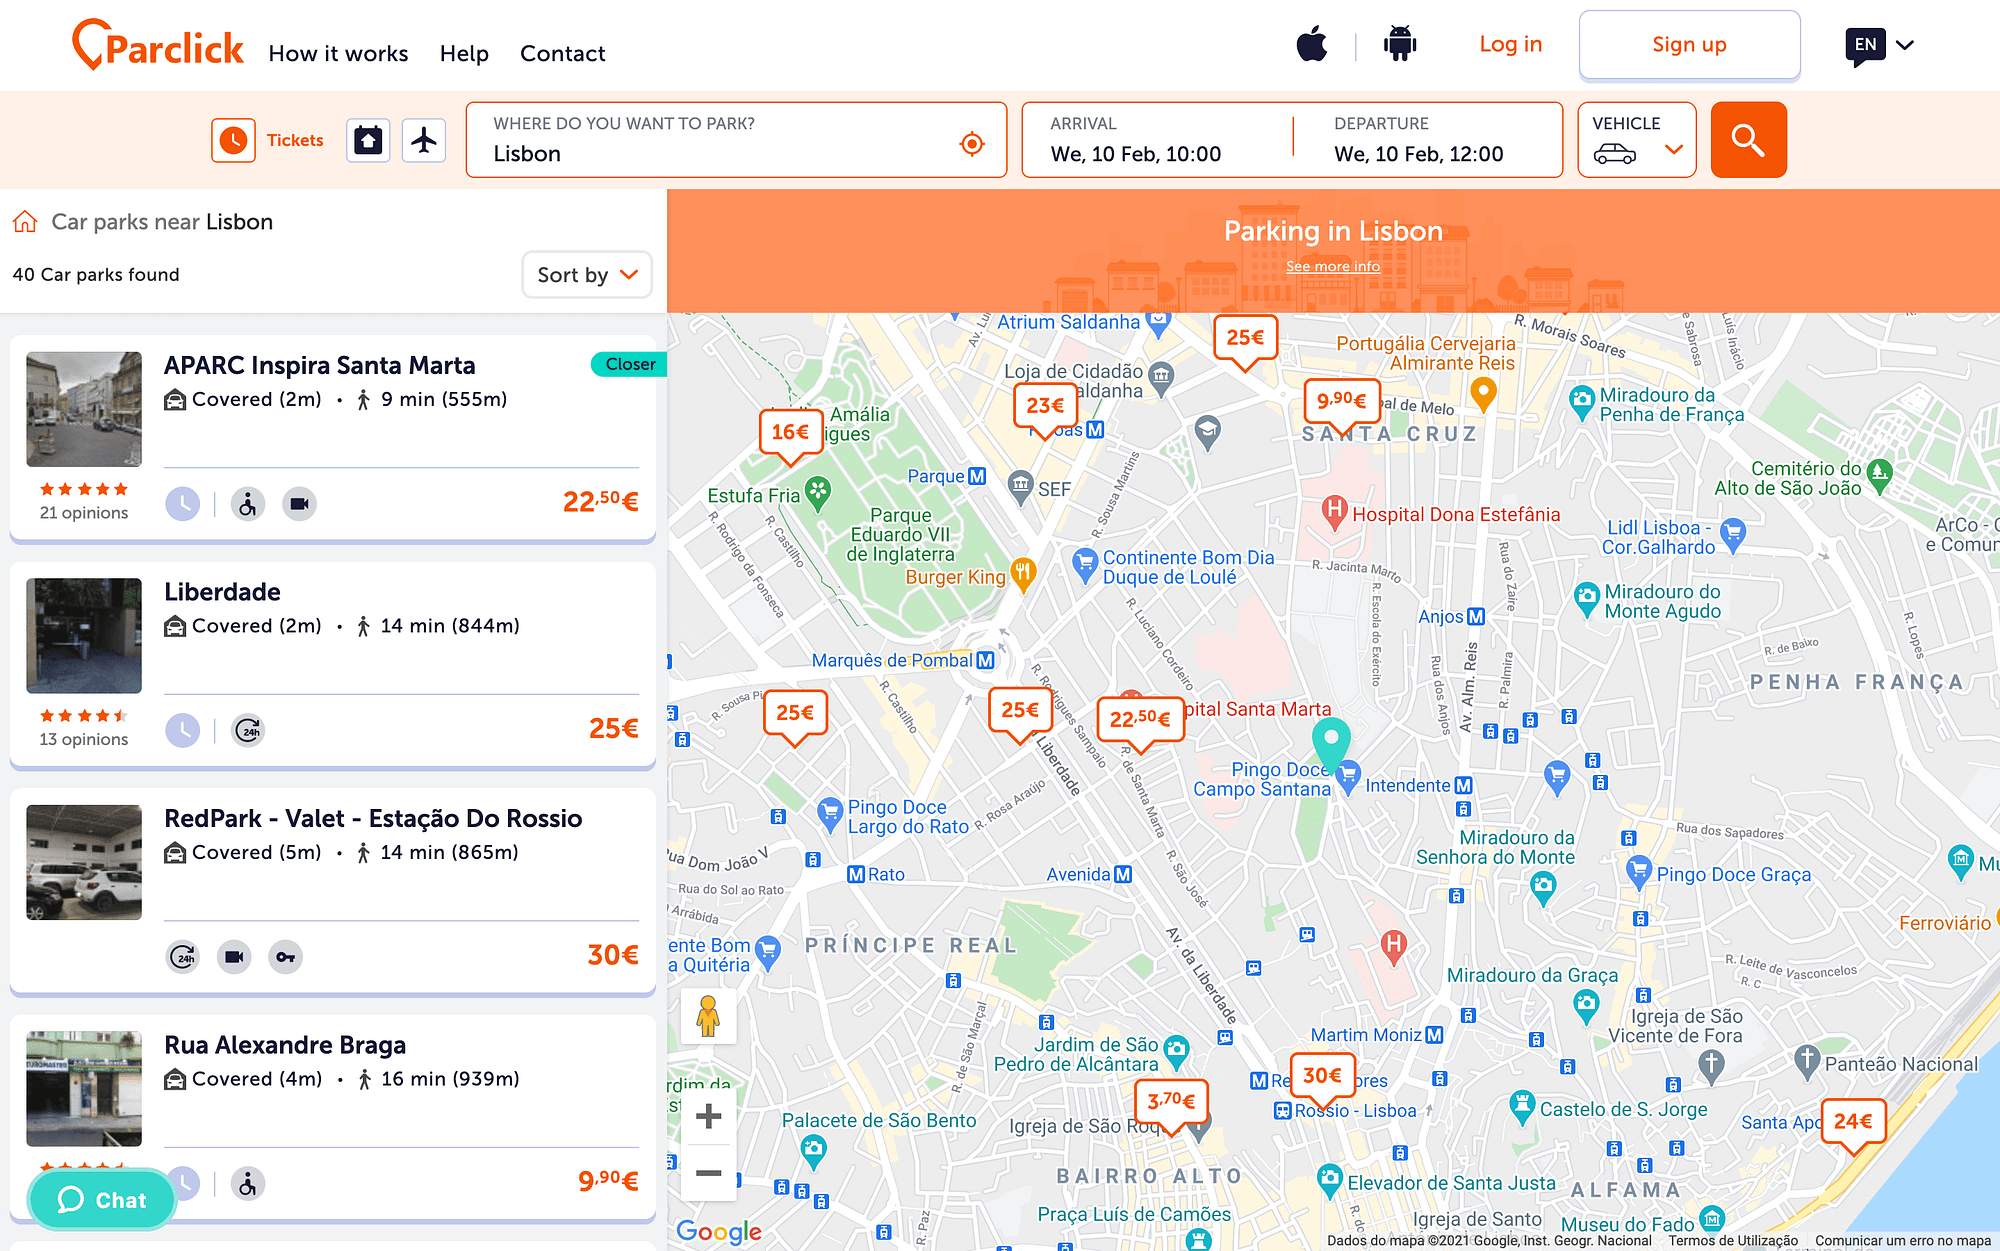 Parclick, an ideal platform for finding cheap private car parks in Lisbon.